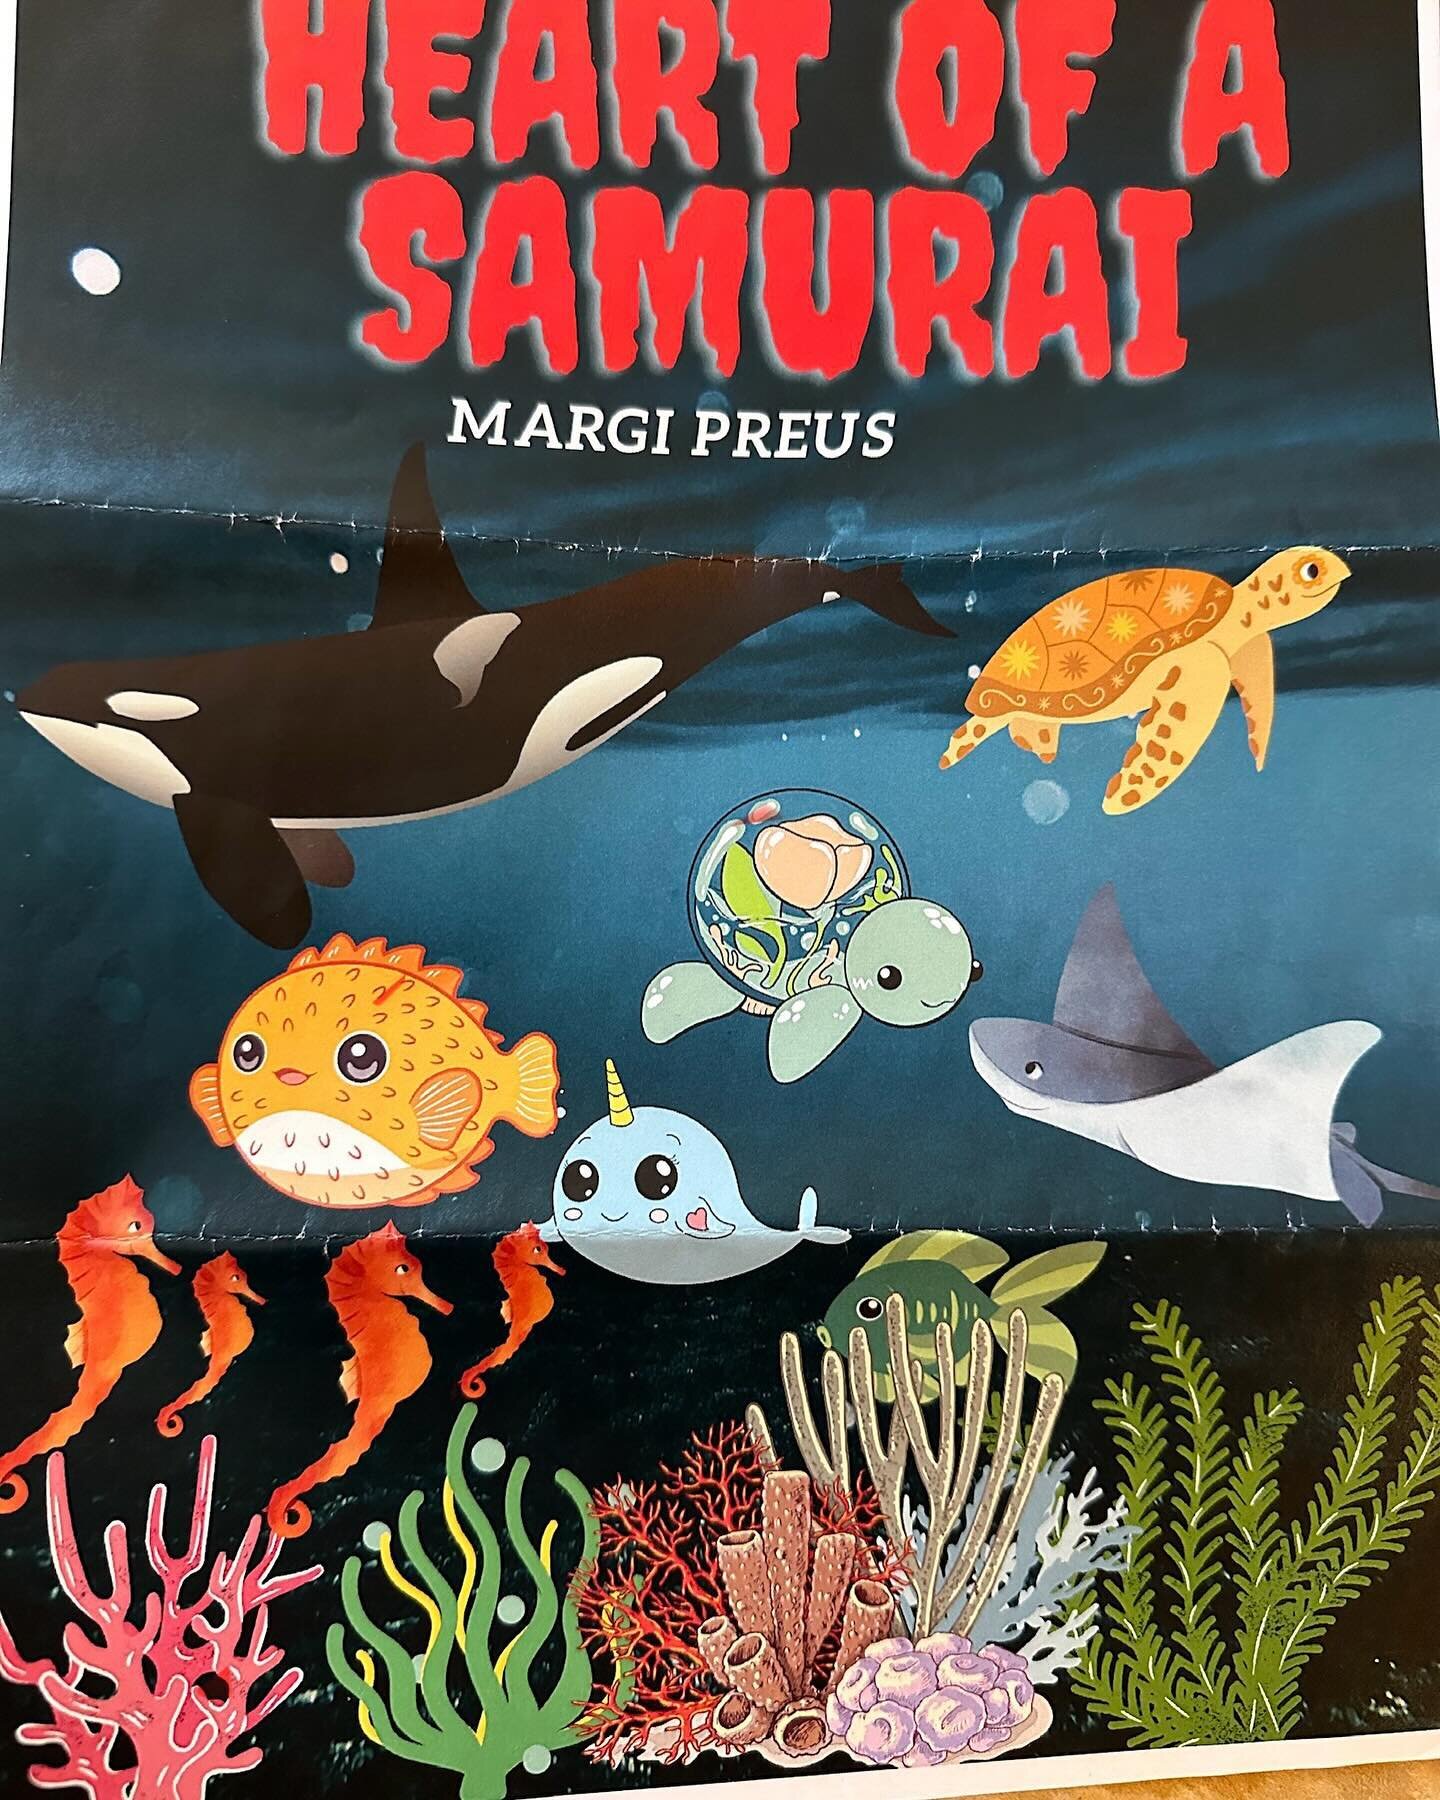 New cover art for Heart of a Samurai? Thanks to the young talent at @intlschoolofportland